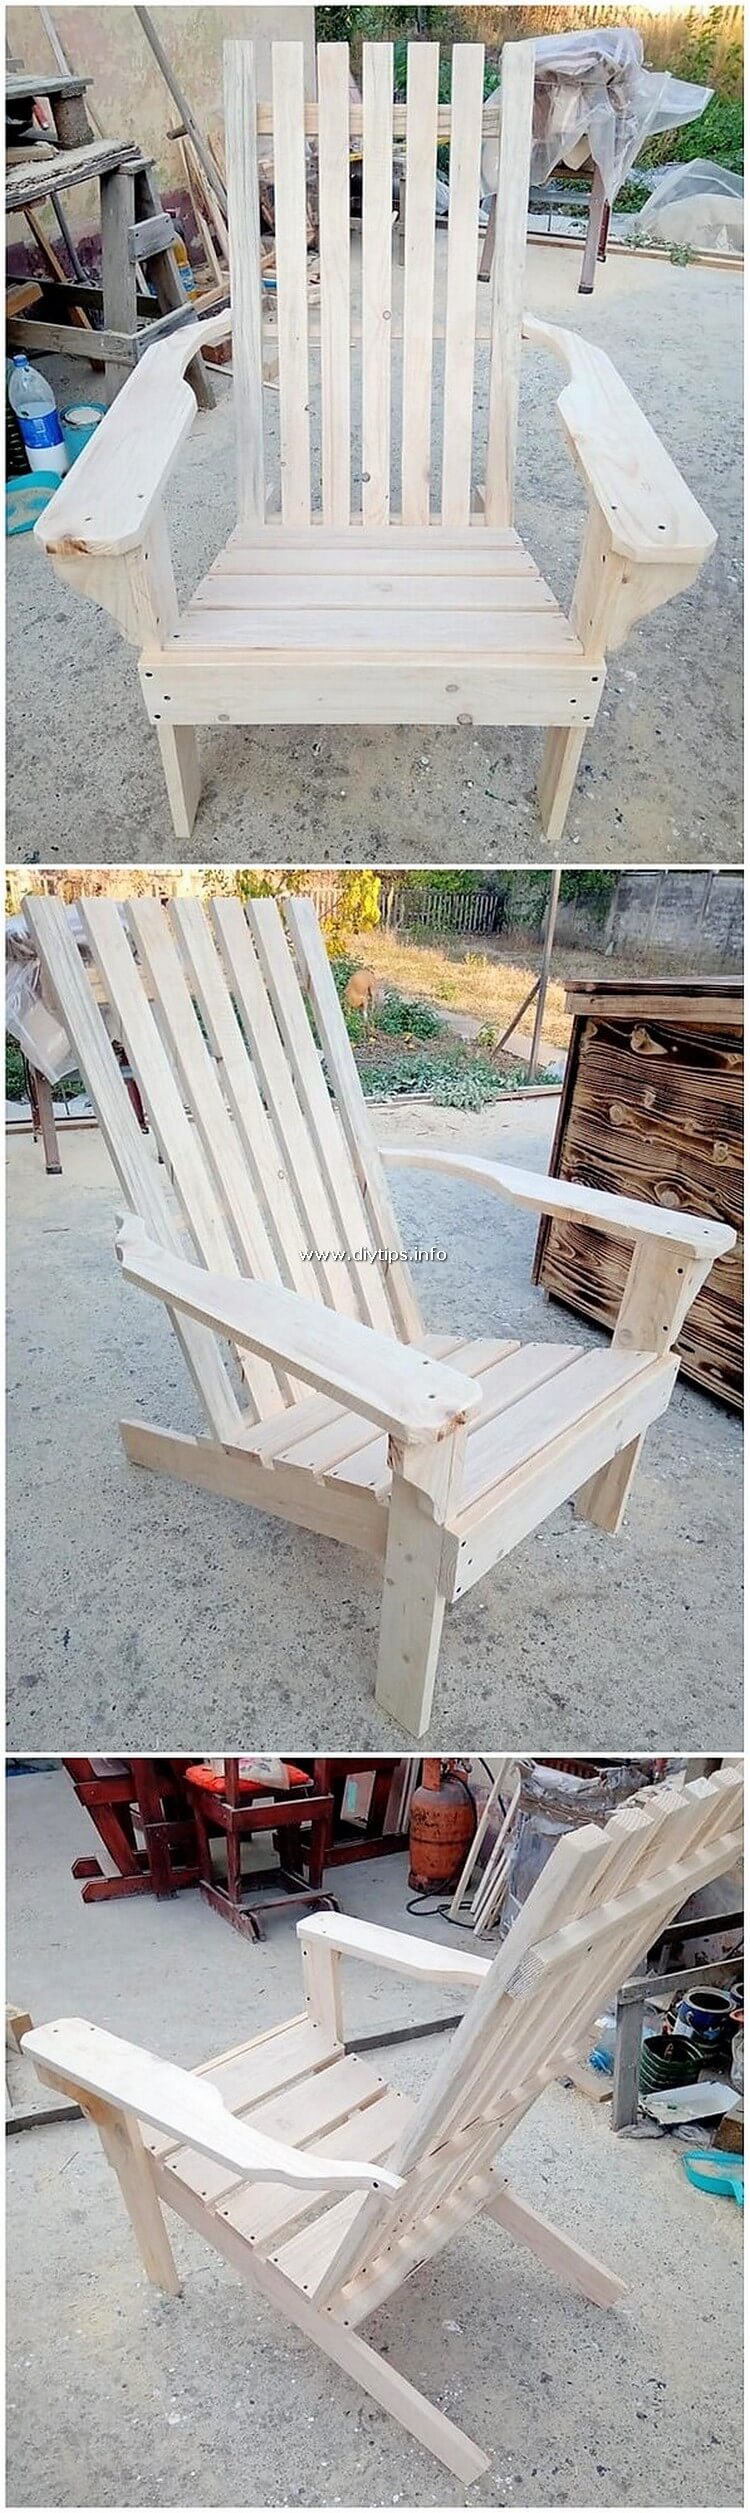 Wood Pallet Chair